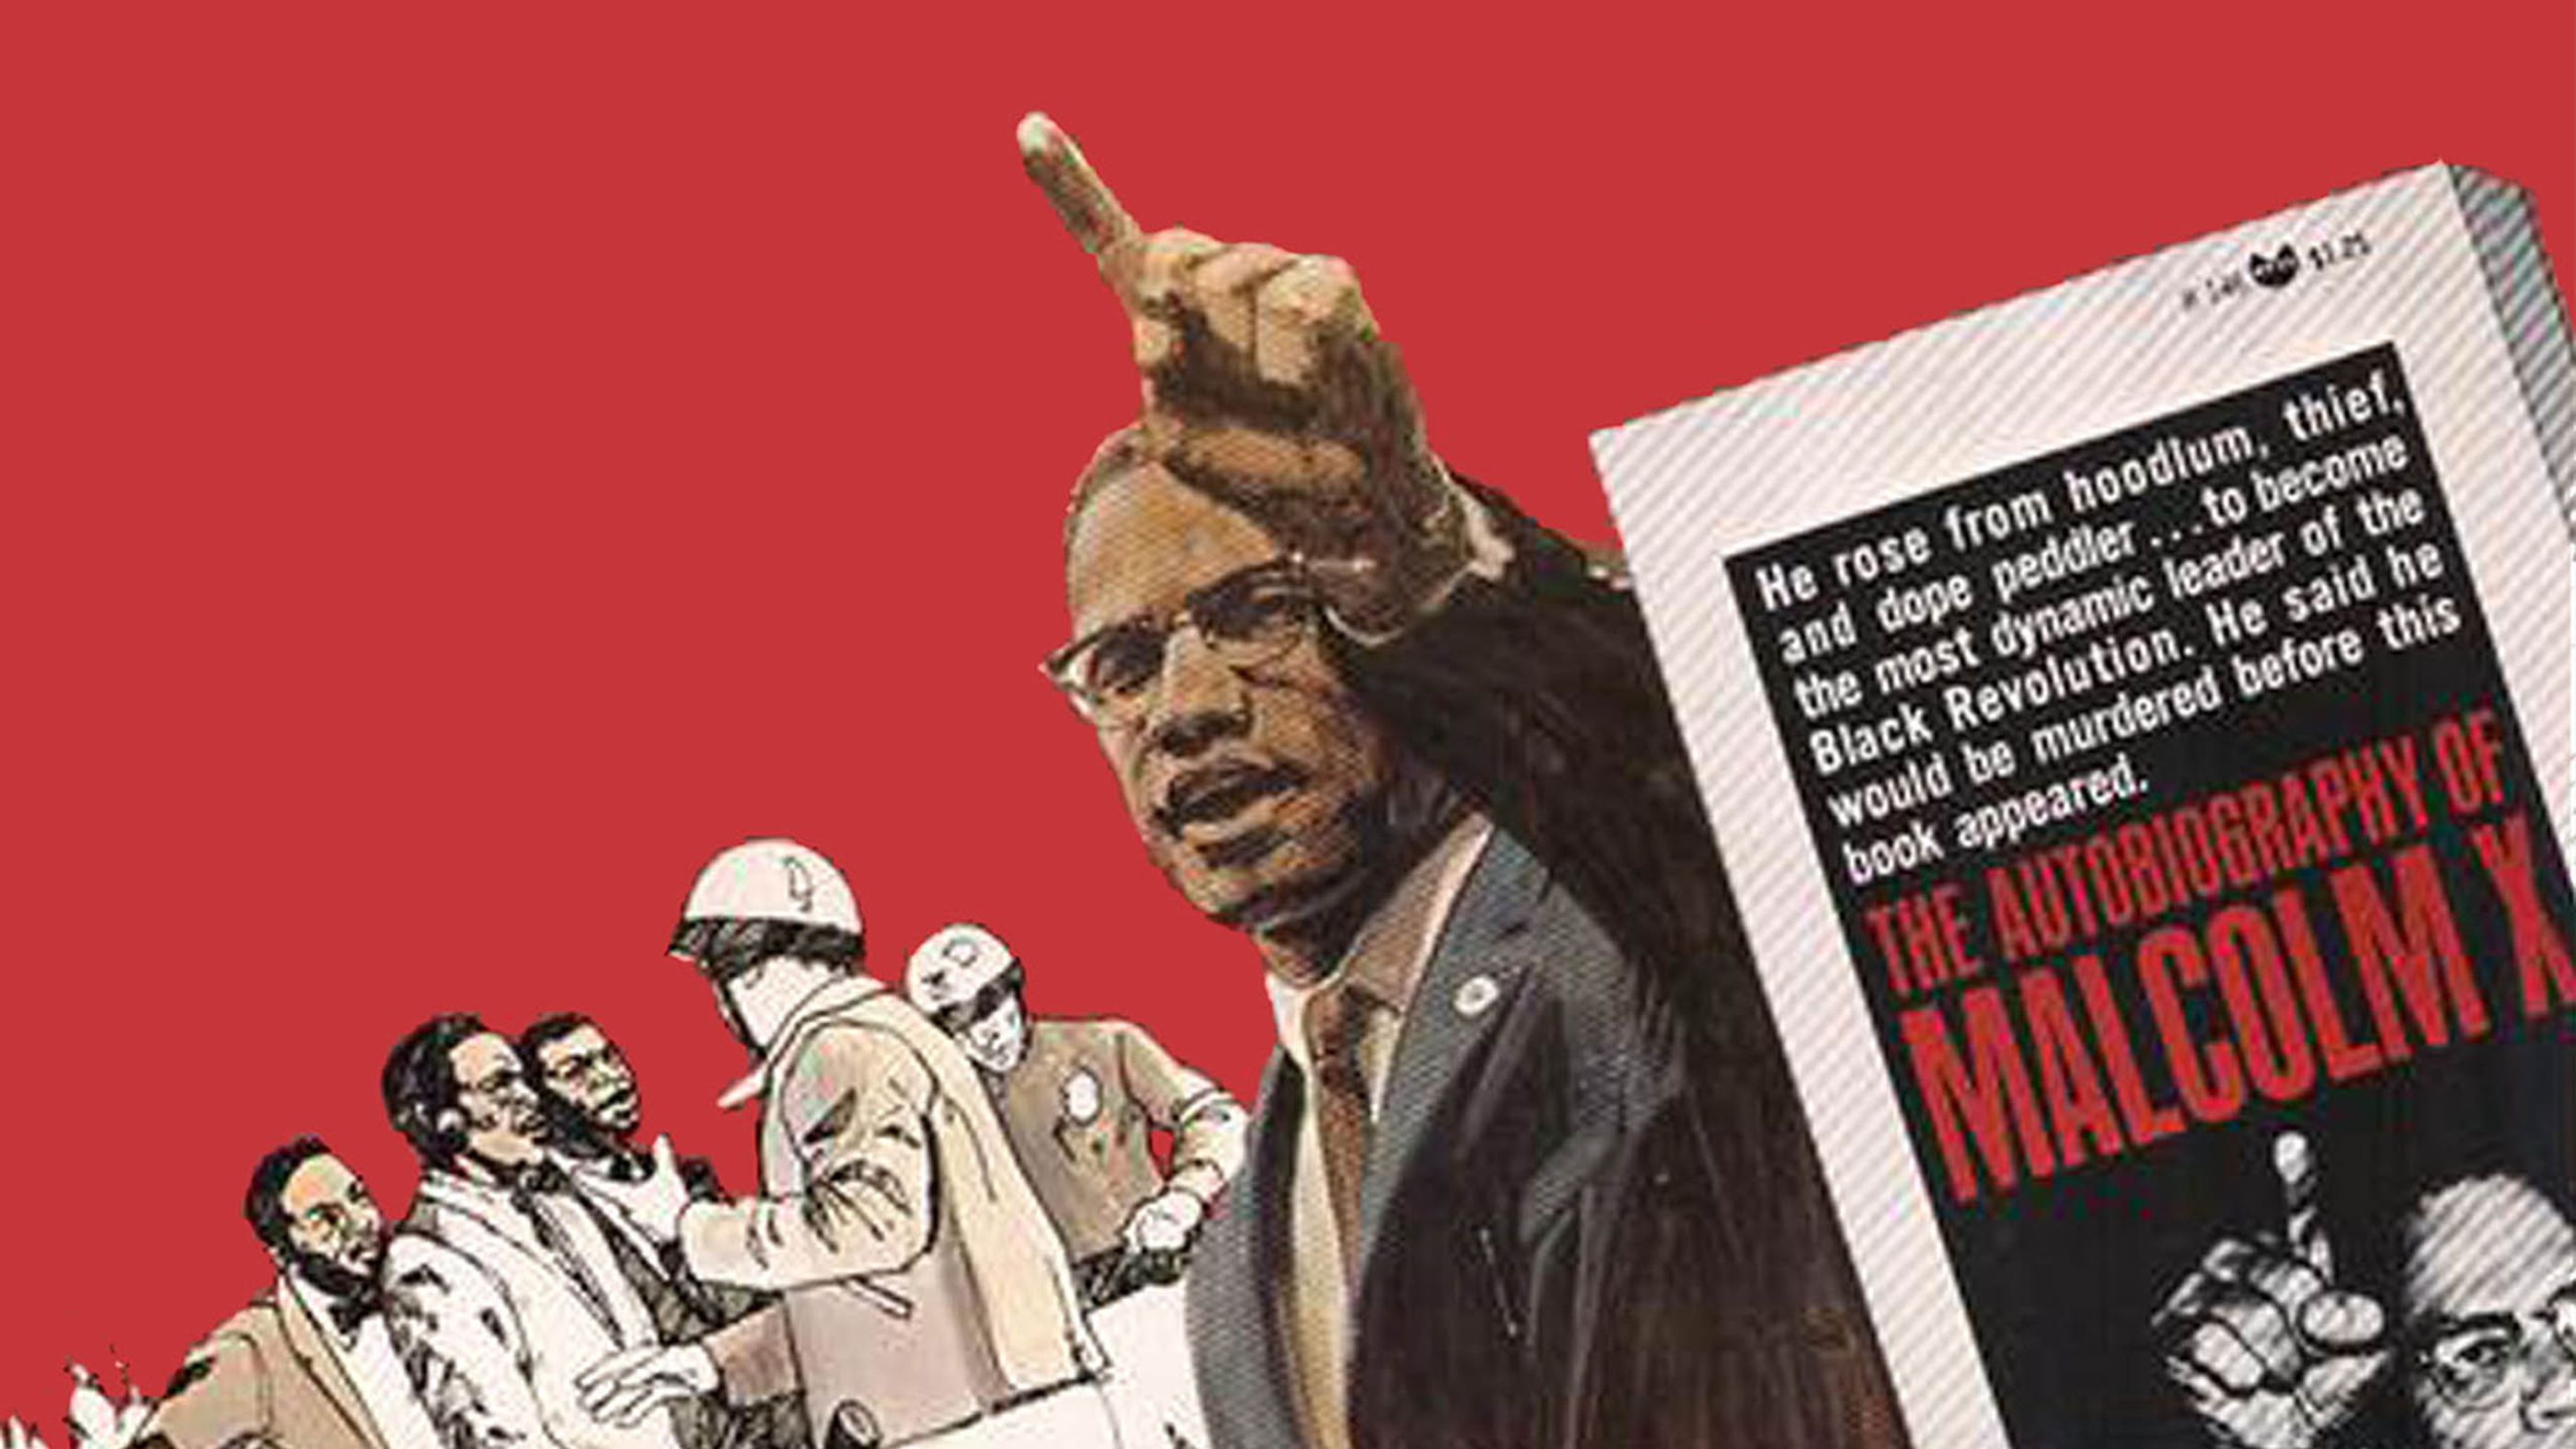 54 Top Images Malcolm X Full Movie Netflix : Watch Malcolm X on Netflix Today! | NetflixMovies.com